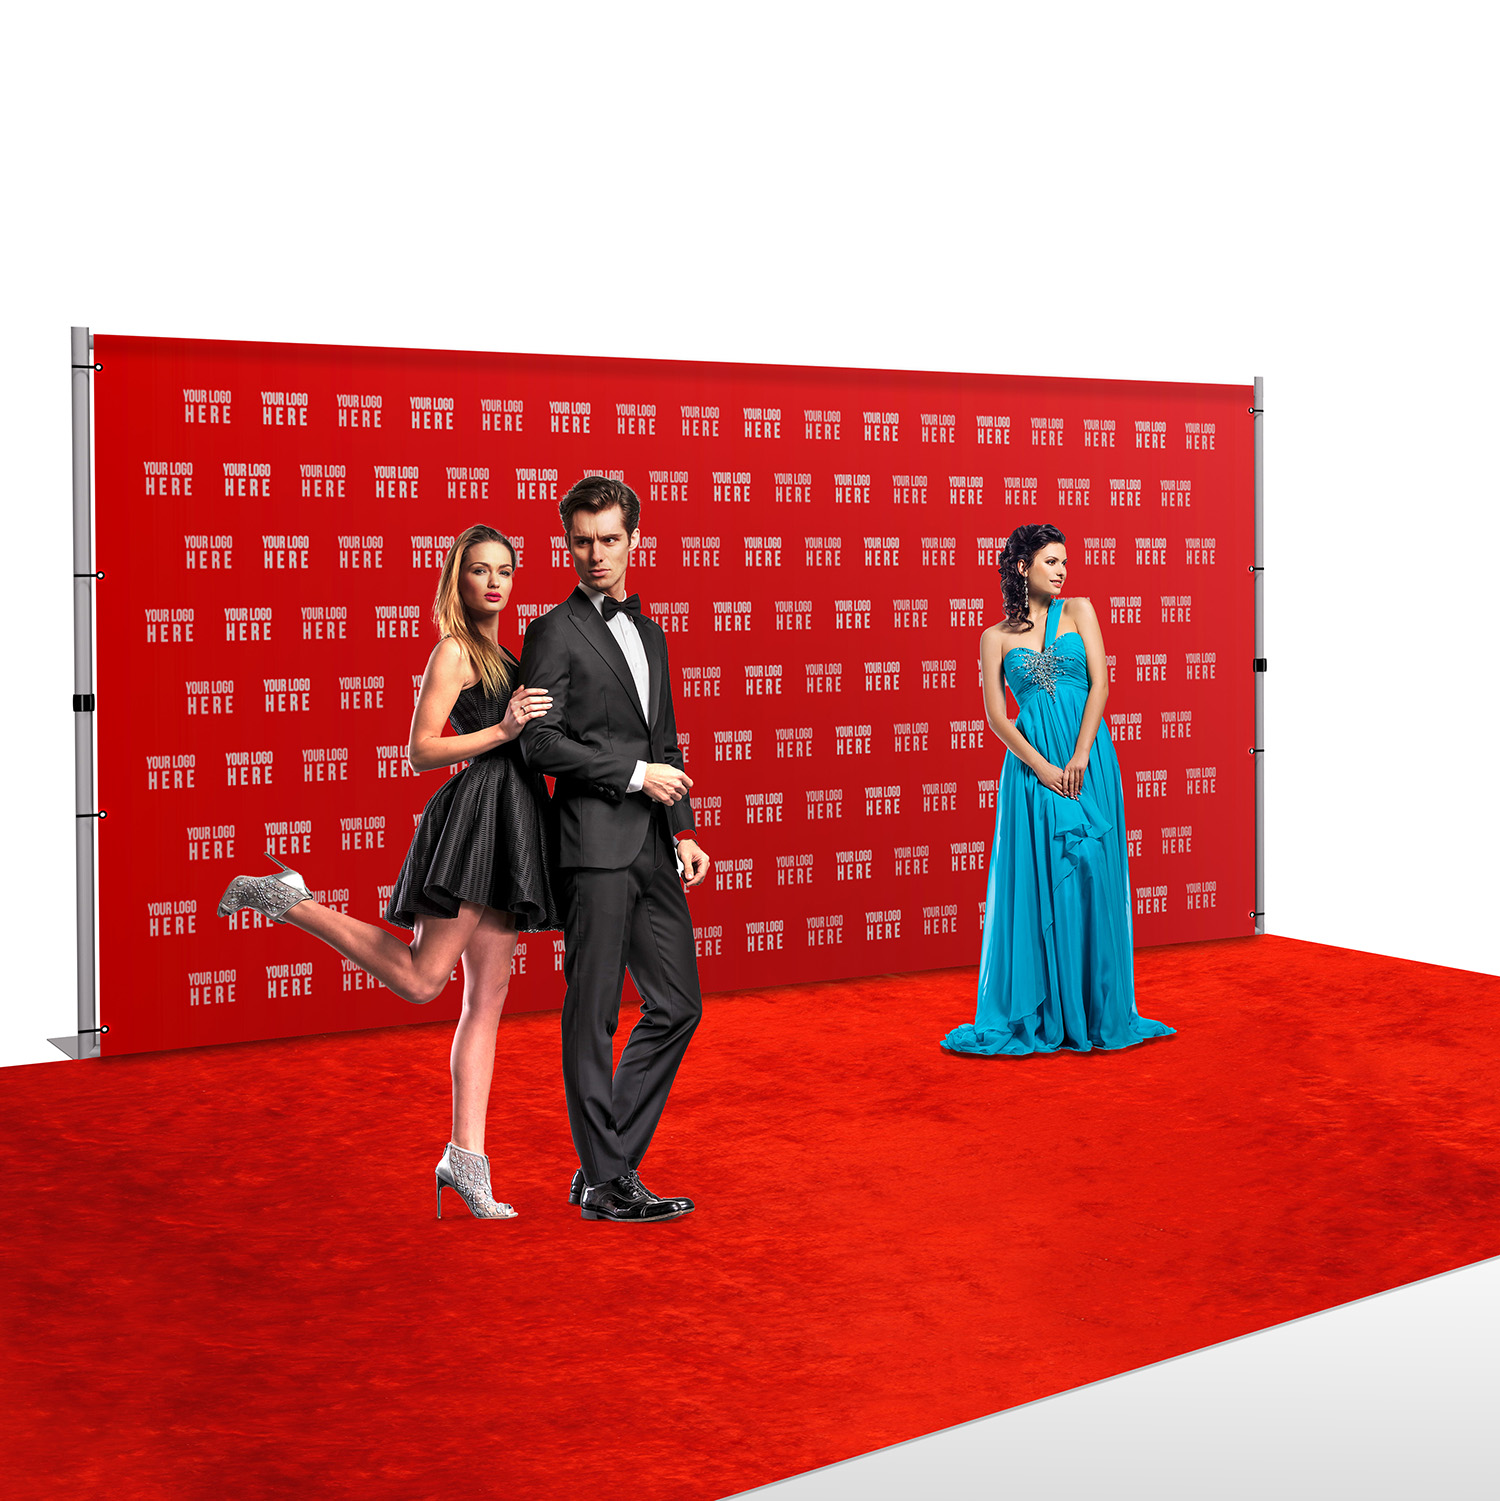 8' x 16' Standard Step and Repeat Backdrop